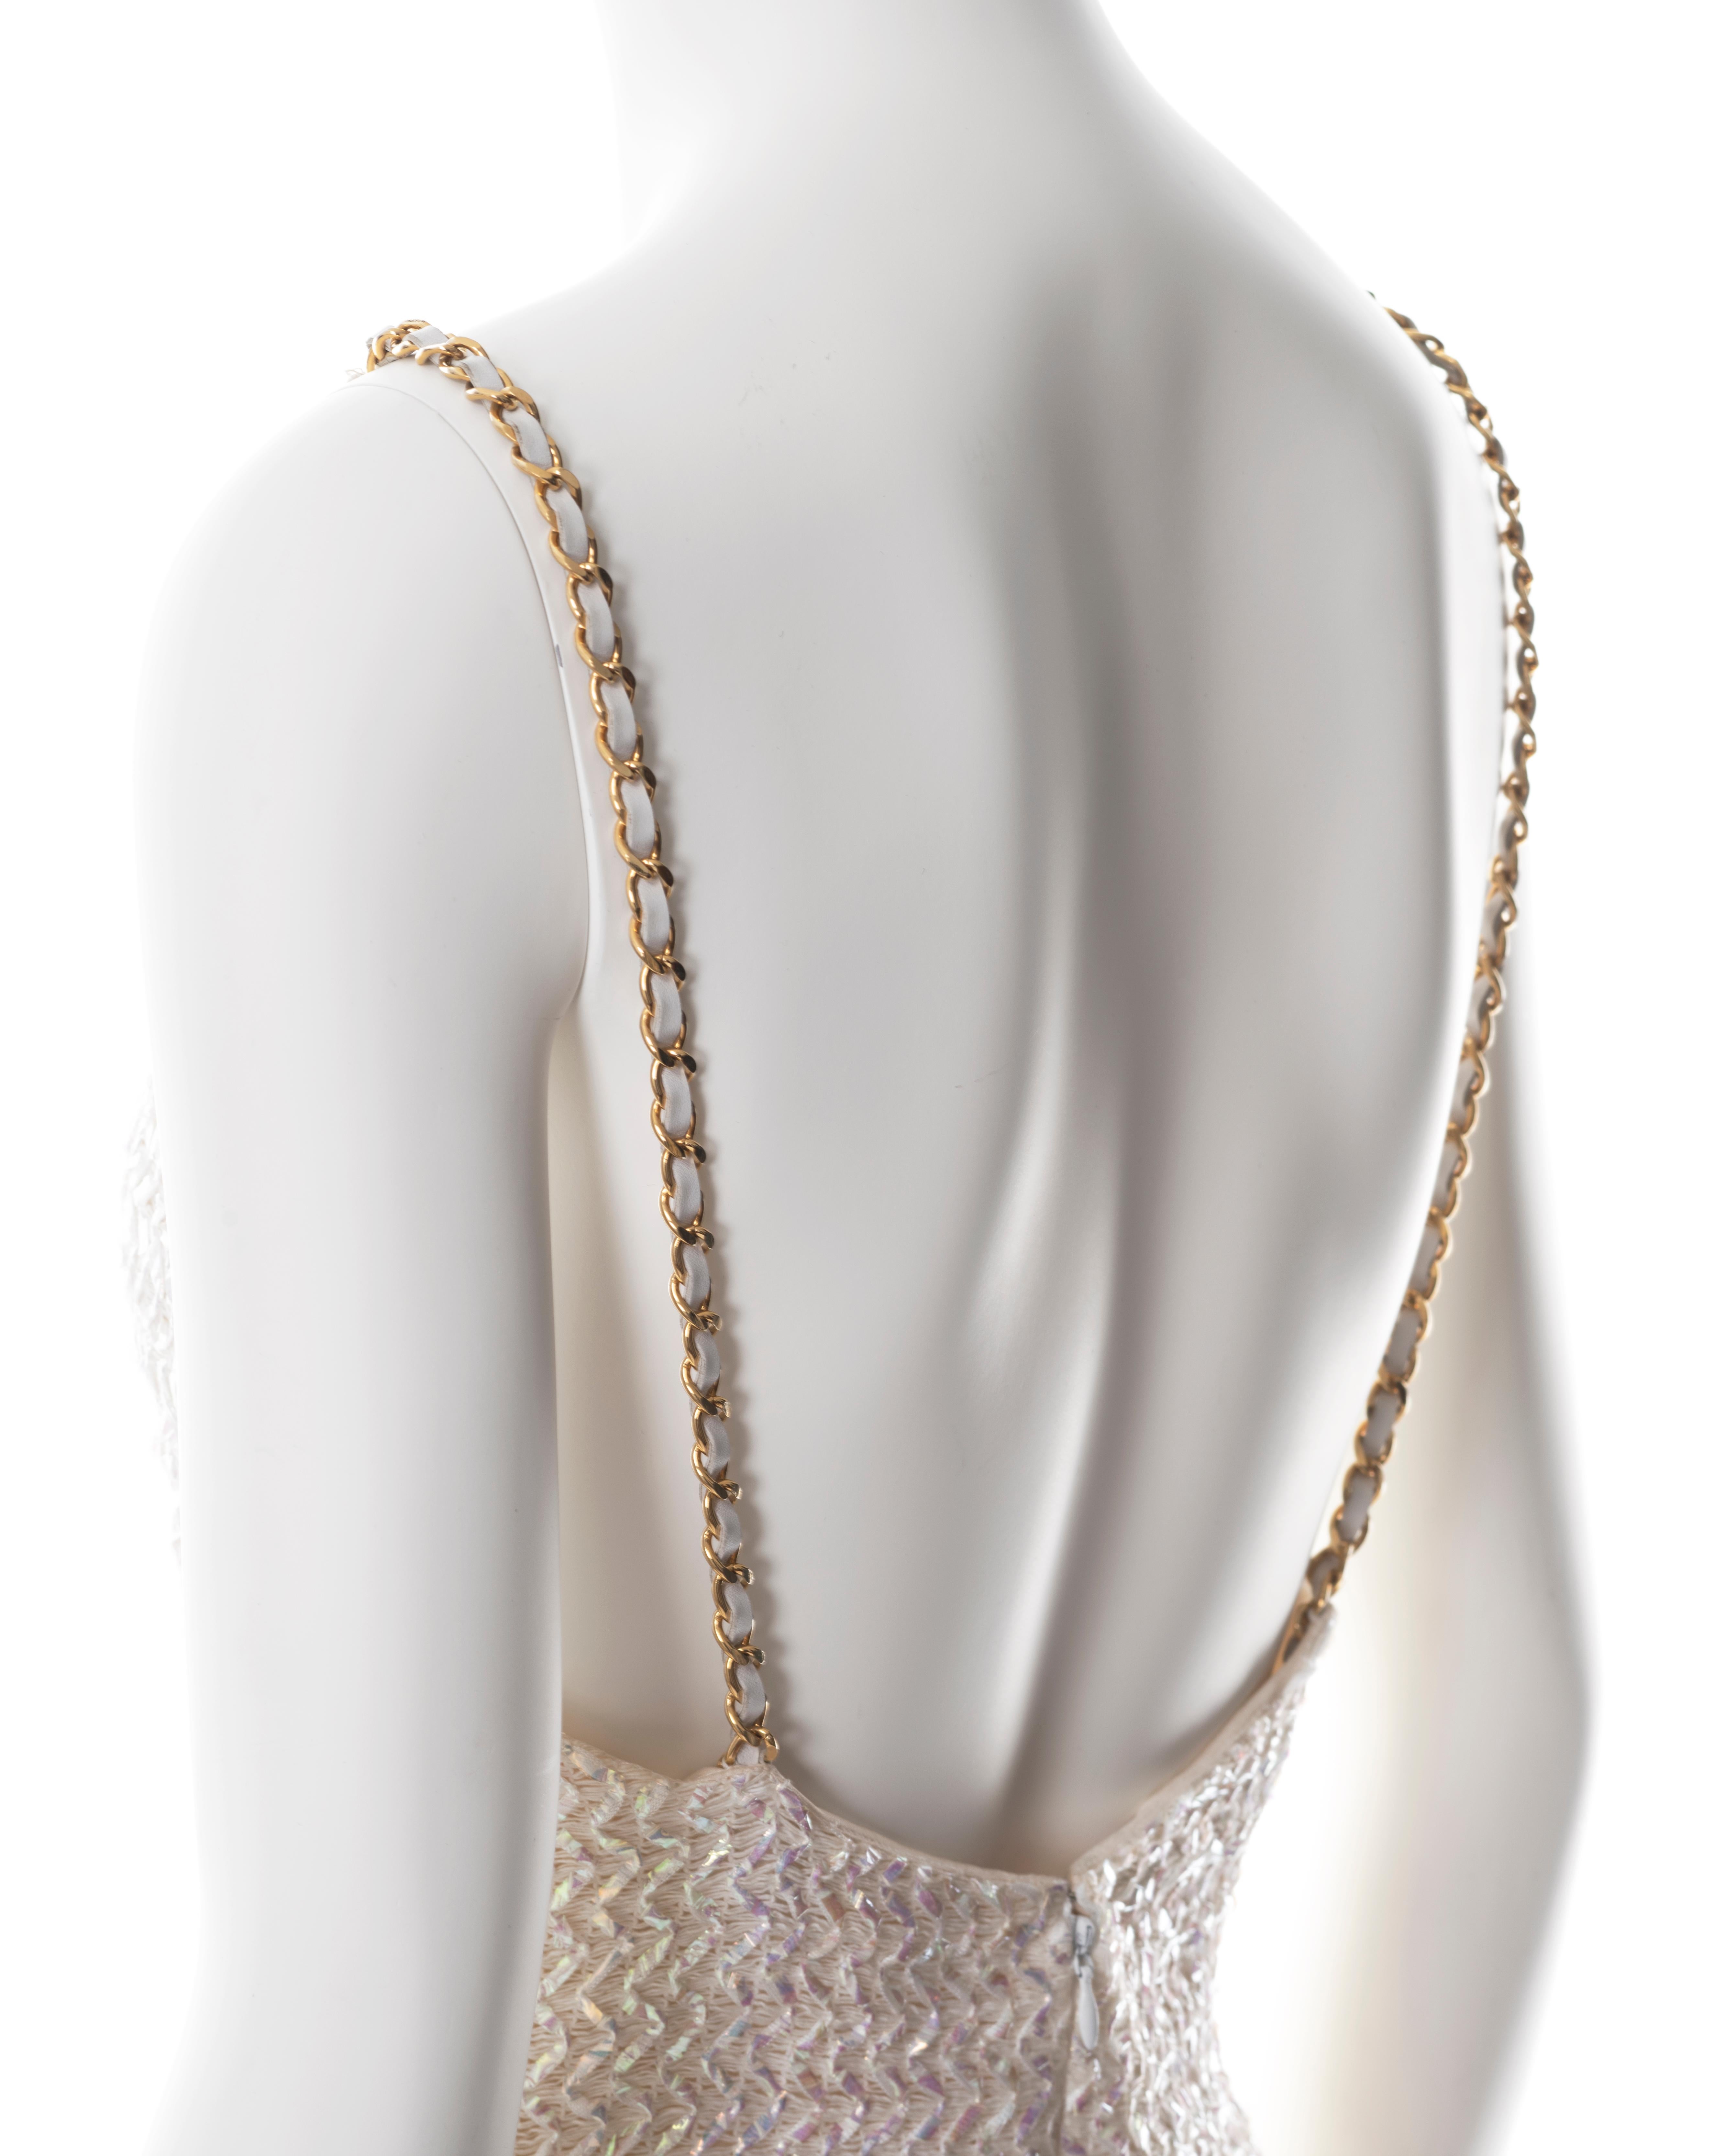 Chanel by Karl Lagerfeld white tweed sheath dress with chain straps, ss 1992 5